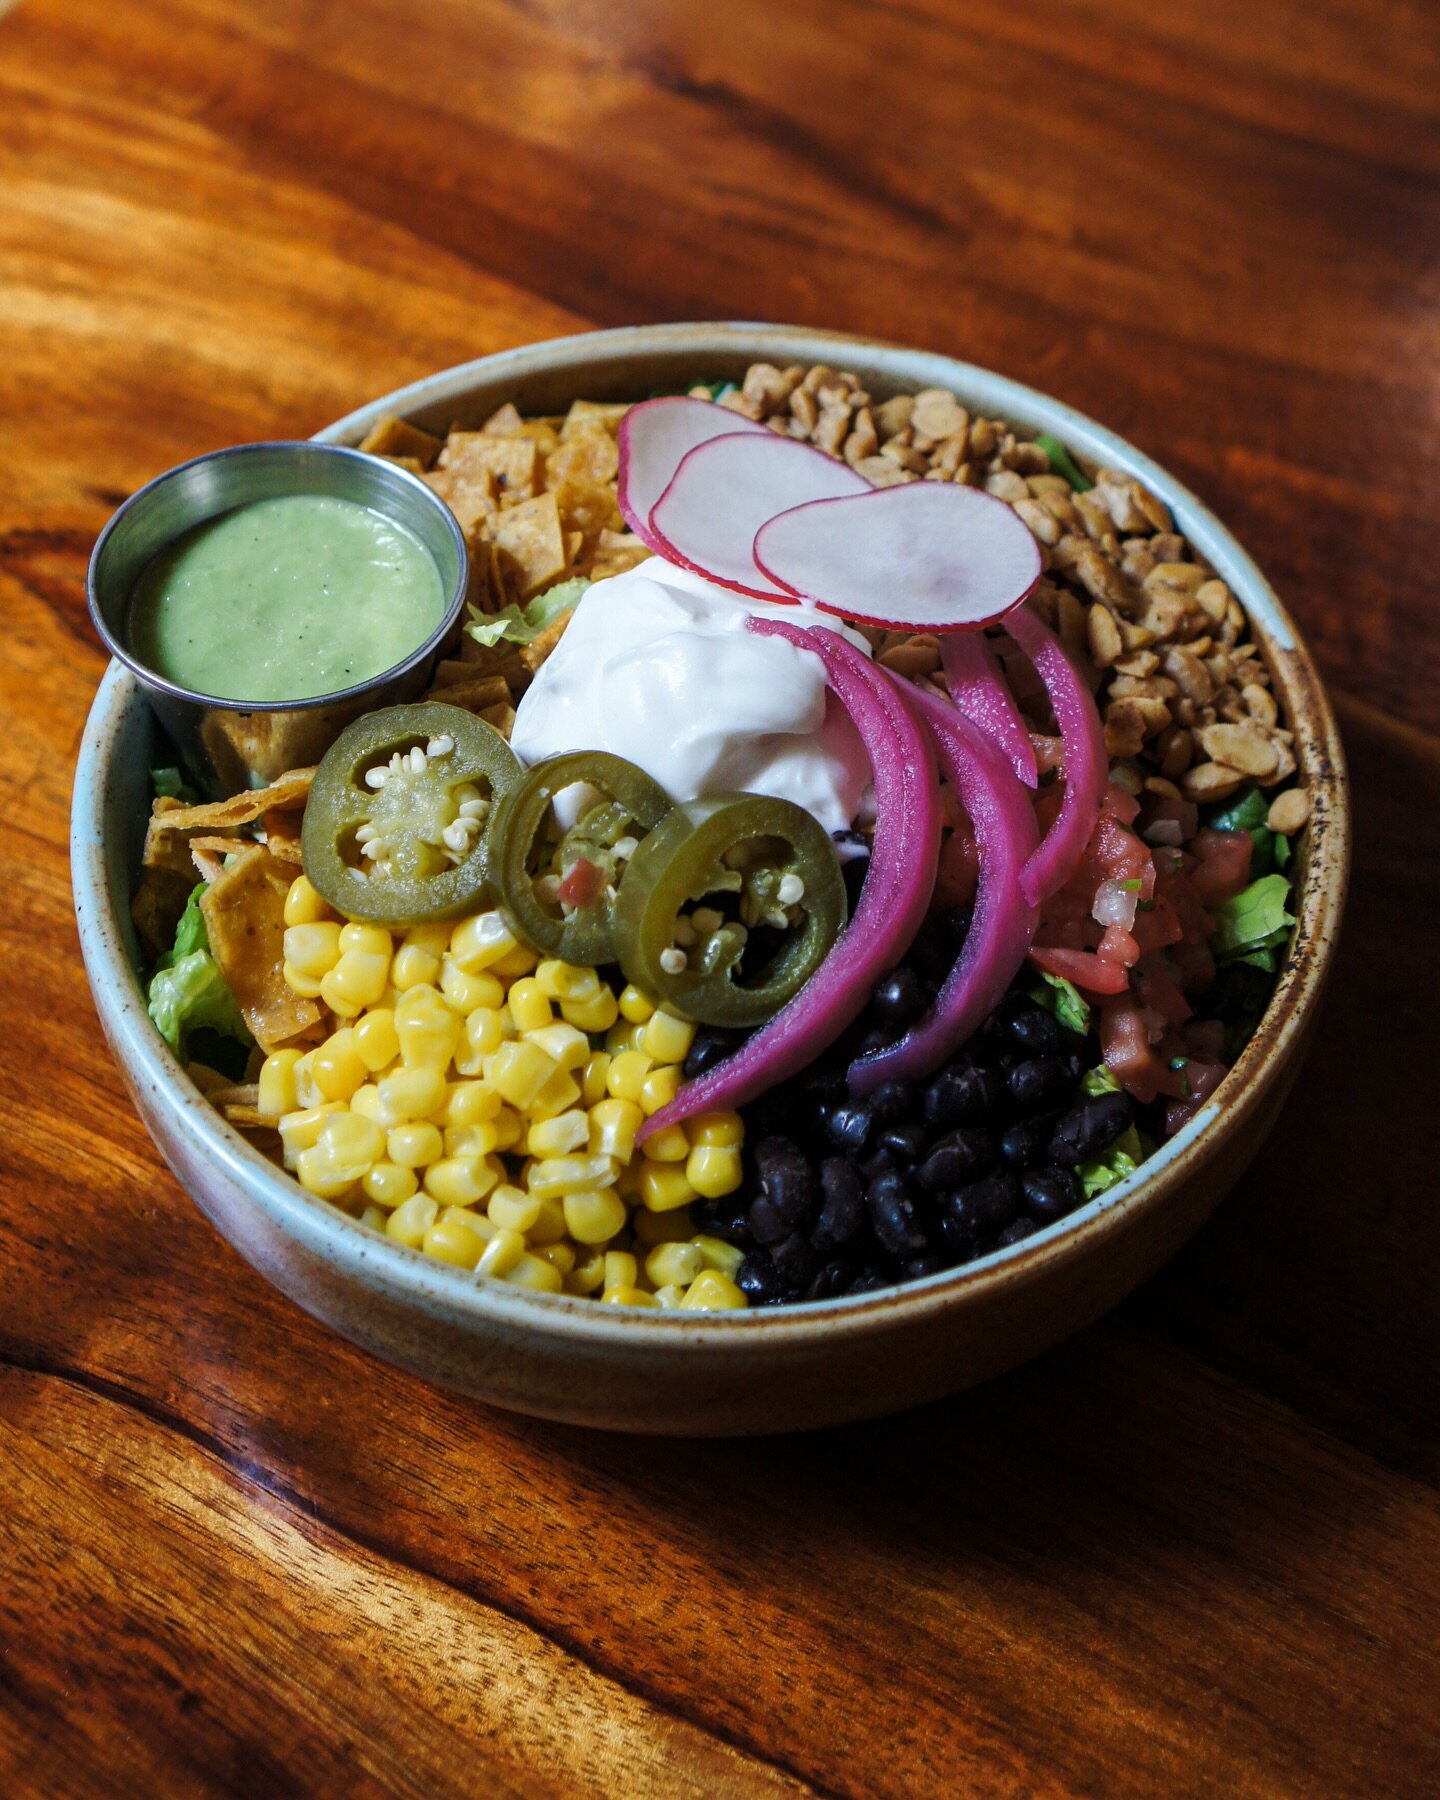 NEW MENU ALERT! 🚨 The Taco Salad 🌮 🥗 

You may have seen it on our special board a few times 👀 It was so popular we decided to put it on the menu permanently! 

This vibrant &amp; delicious bowl includes&hellip;

Organic Romaine Lettuce 
Organic 